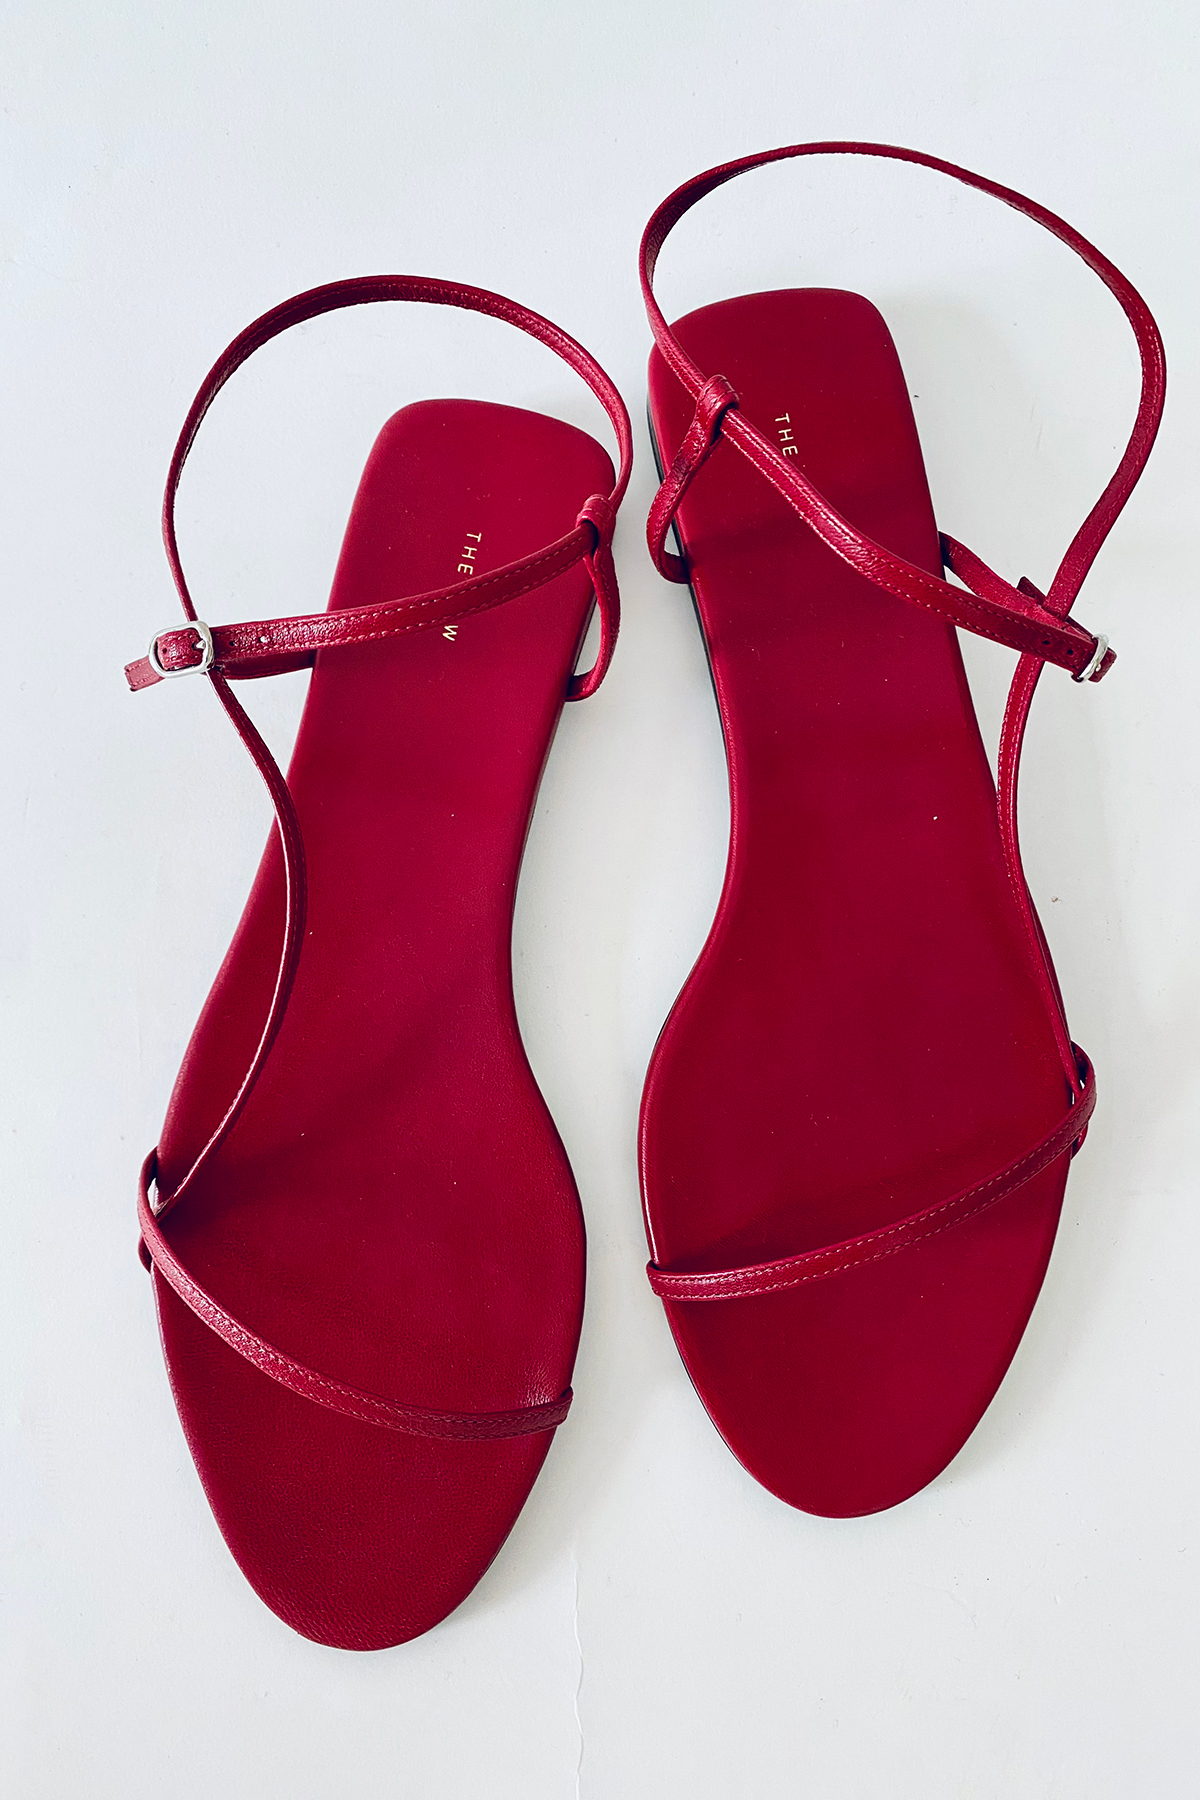 The Row sandal red incl box